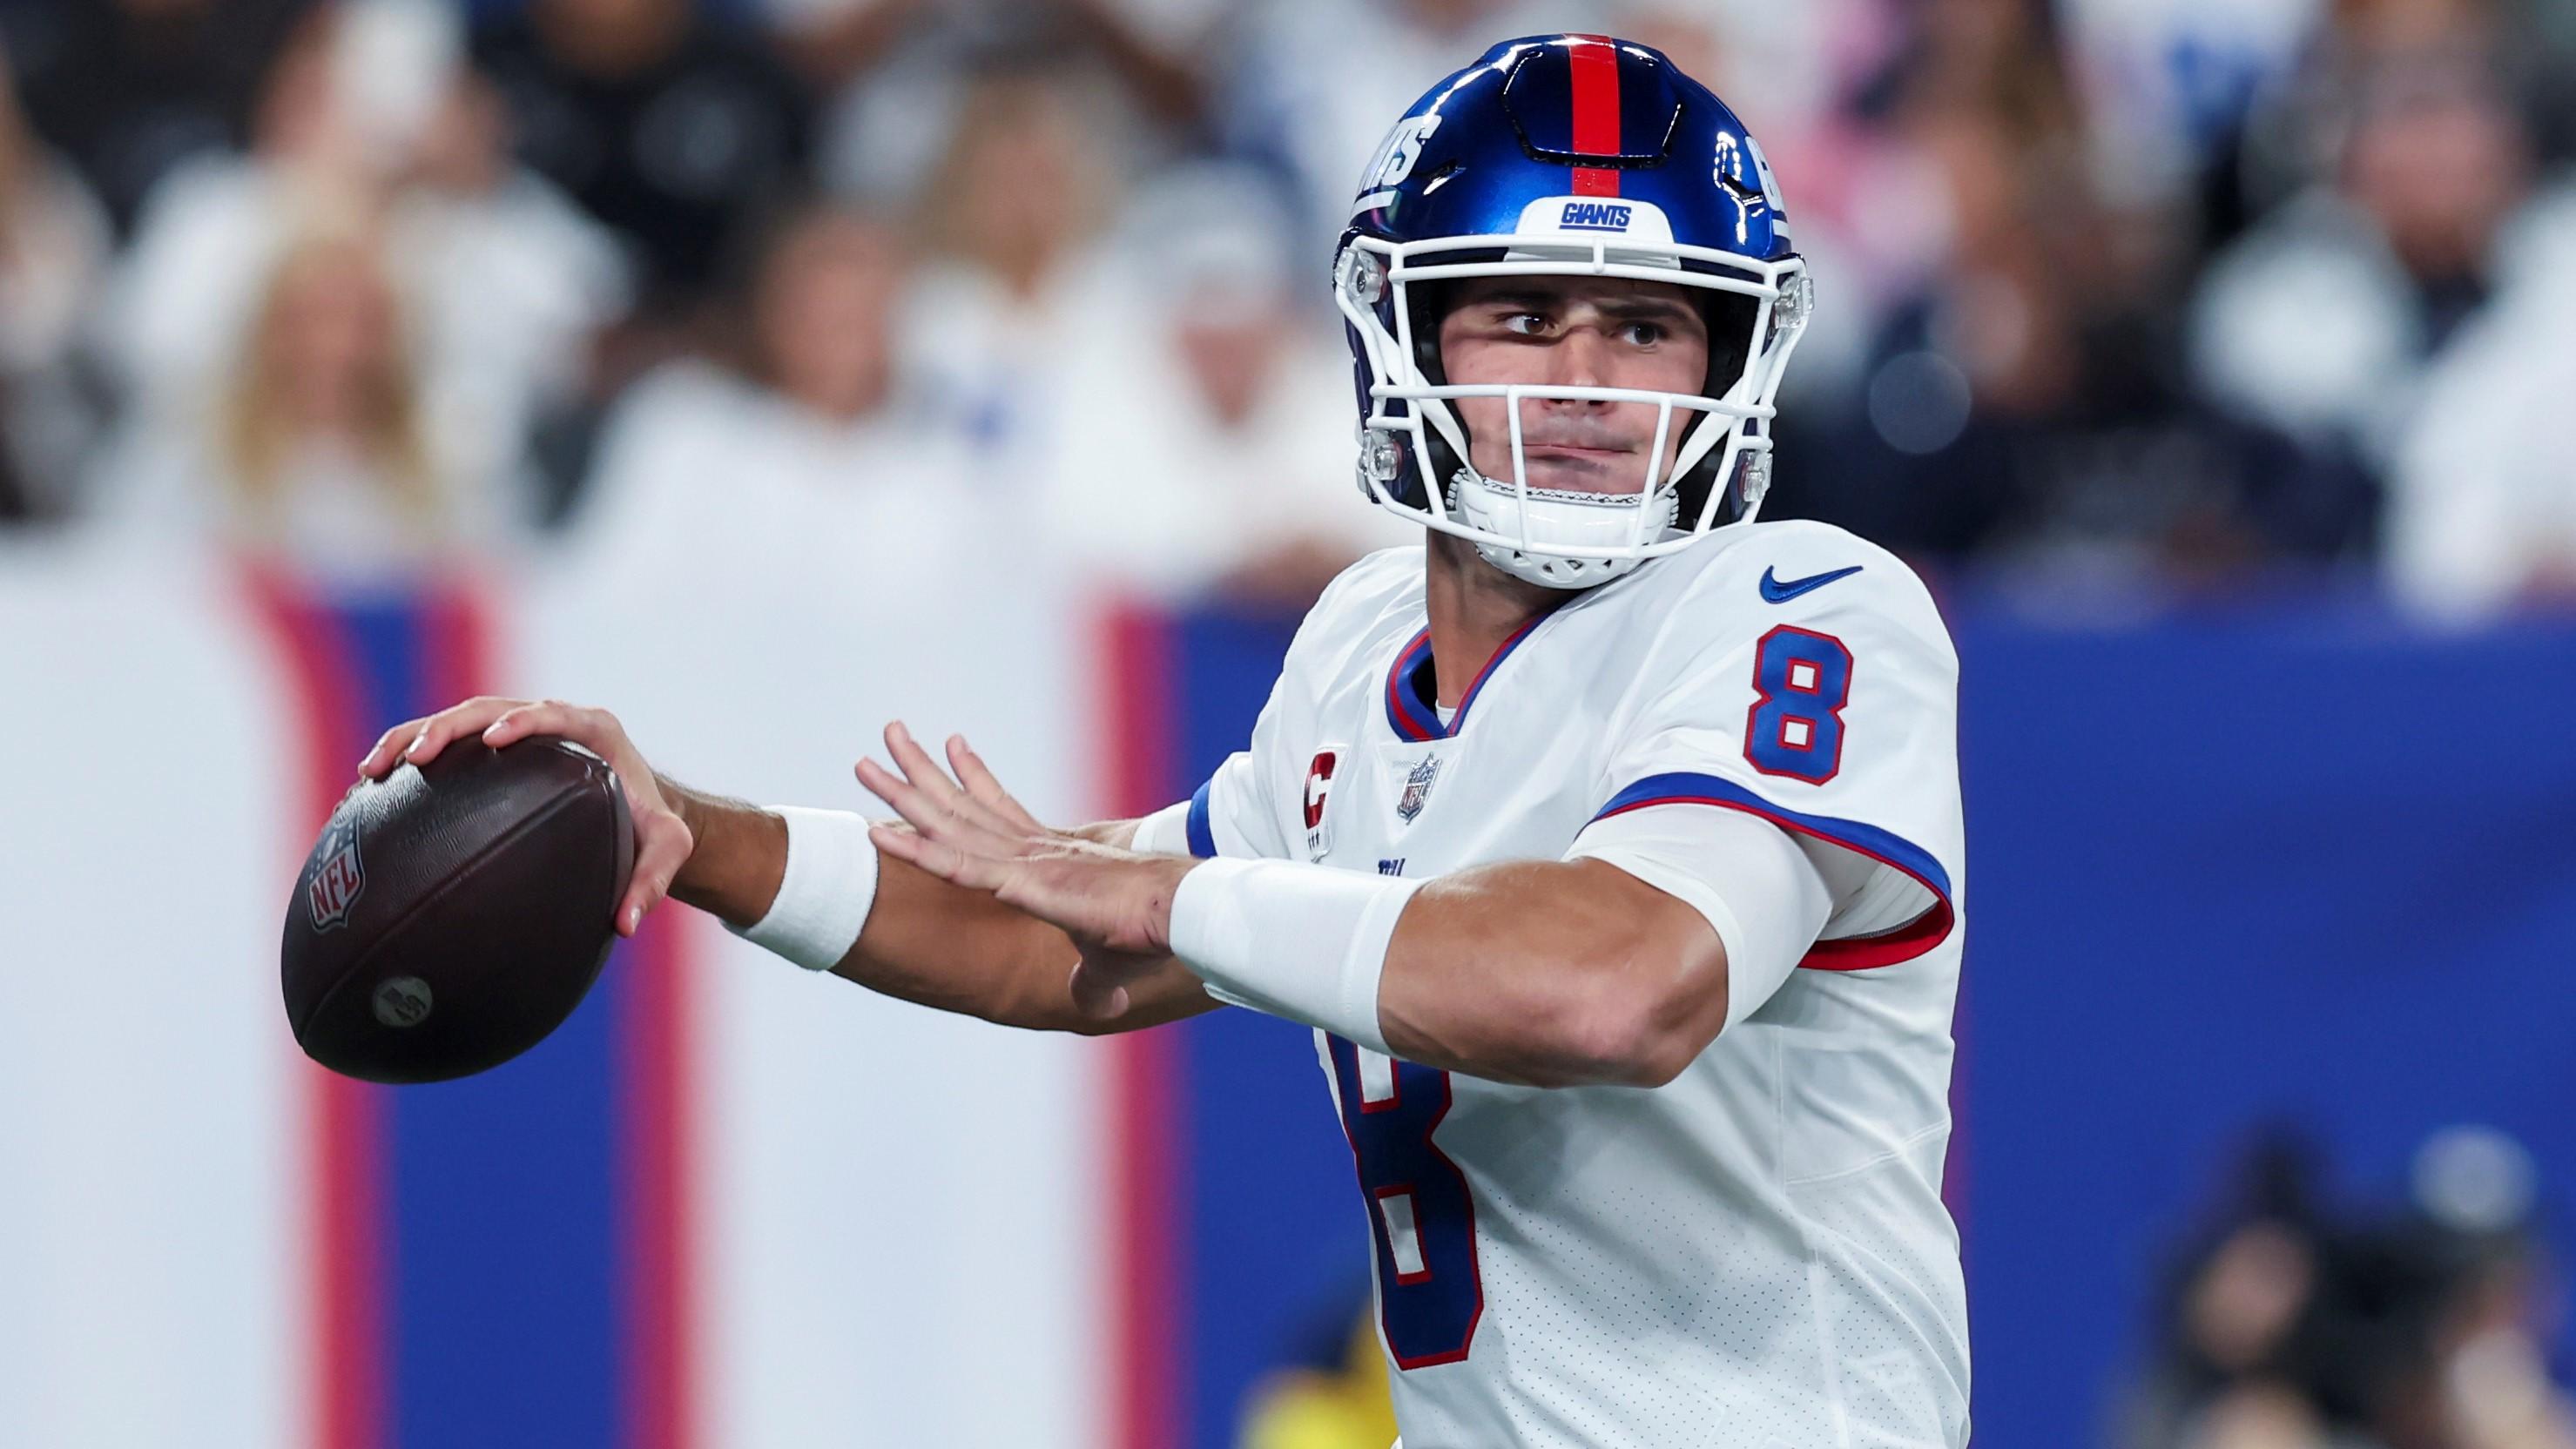 Sep 26, 2022; East Rutherford, New Jersey, USA; New York Giants quarterback Daniel Jones (8) throws during the first quarter against the Dallas Cowboys during the first quarter at MetLife Stadium. Mandatory Credit: Brad Penner-USA TODAY Sports / © Brad Penner-USA TODAY Sports